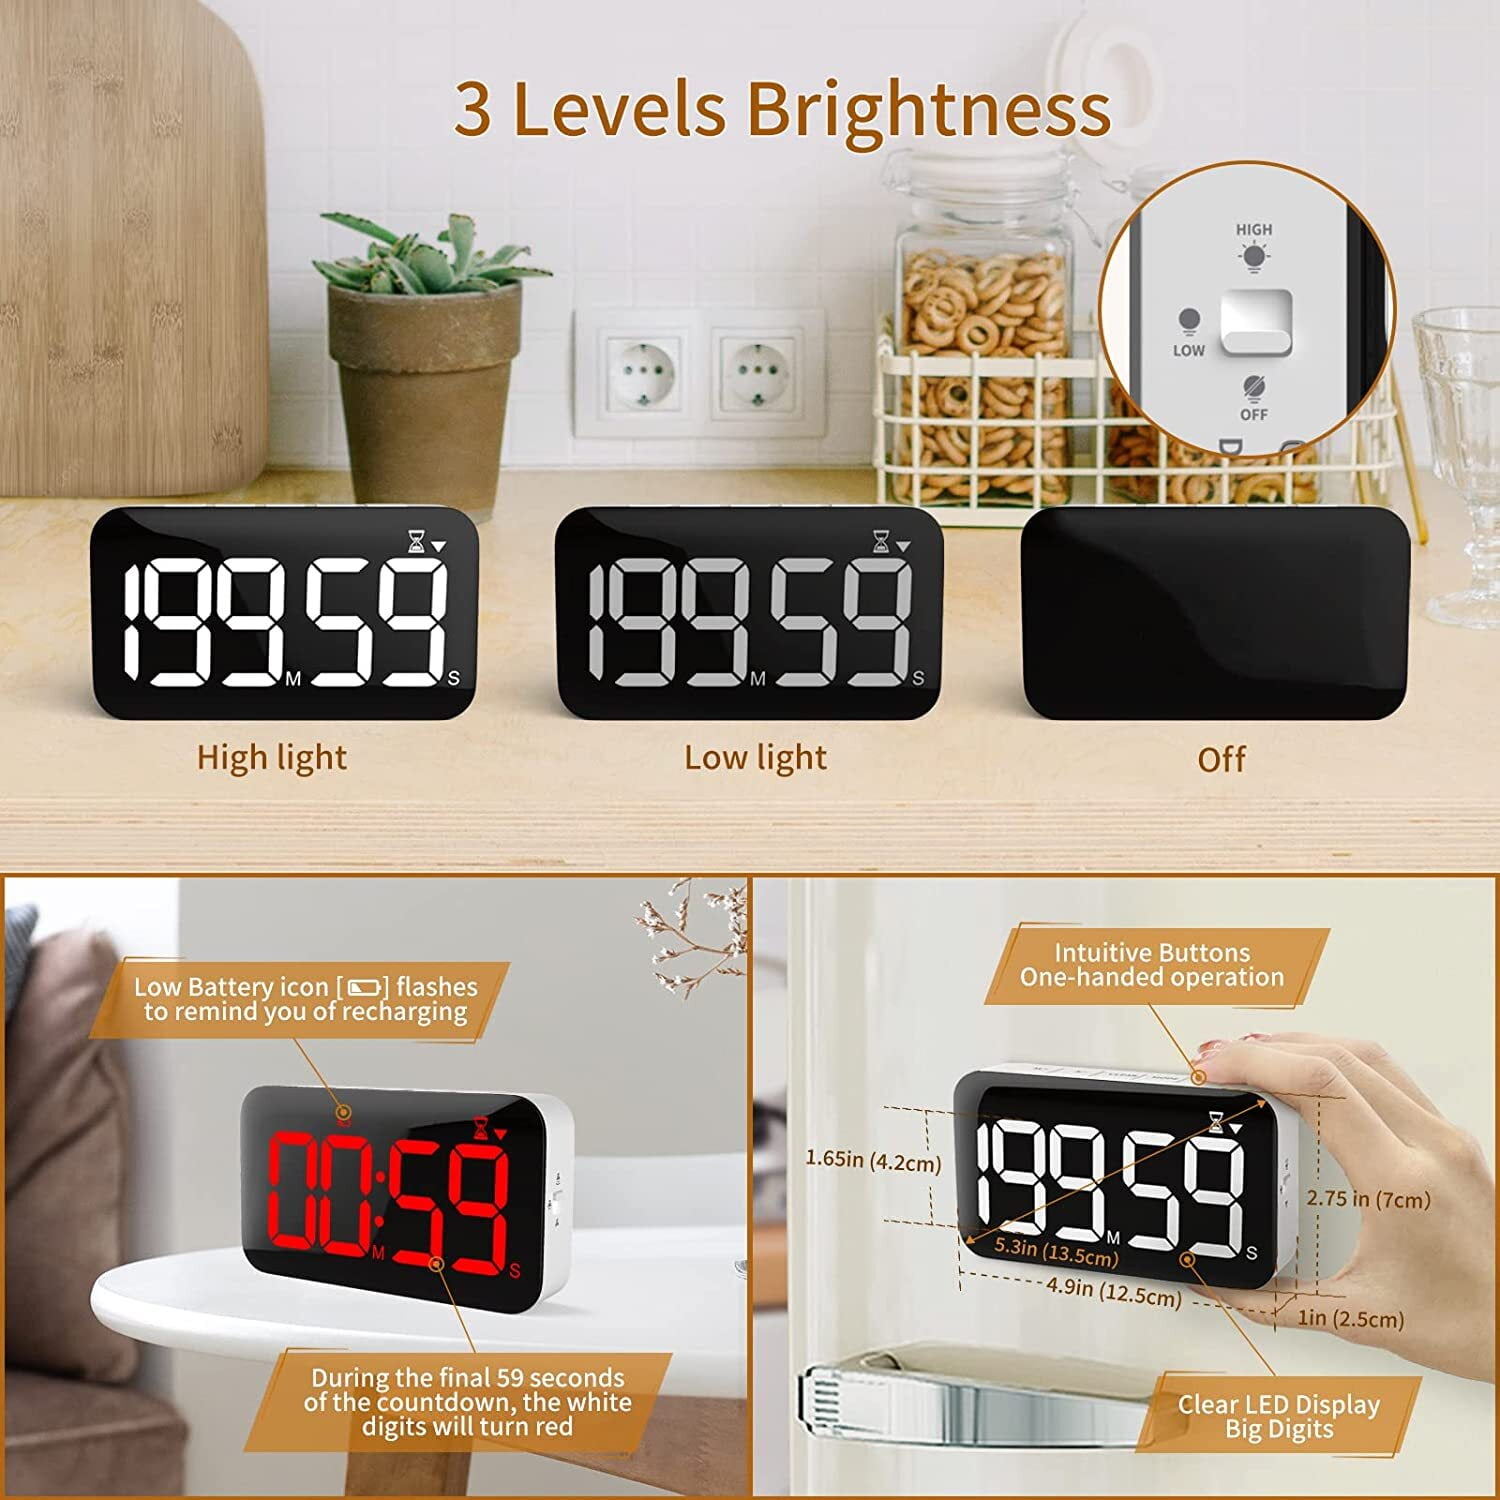  VOCOO Digital Kitchen Timer - Magnetic Countdown Countup Timer  with Large LED Display Volume Adjustable, Easy for Cooking and for Seniors  and Kids to Use (Space Grey) : Home & Kitchen